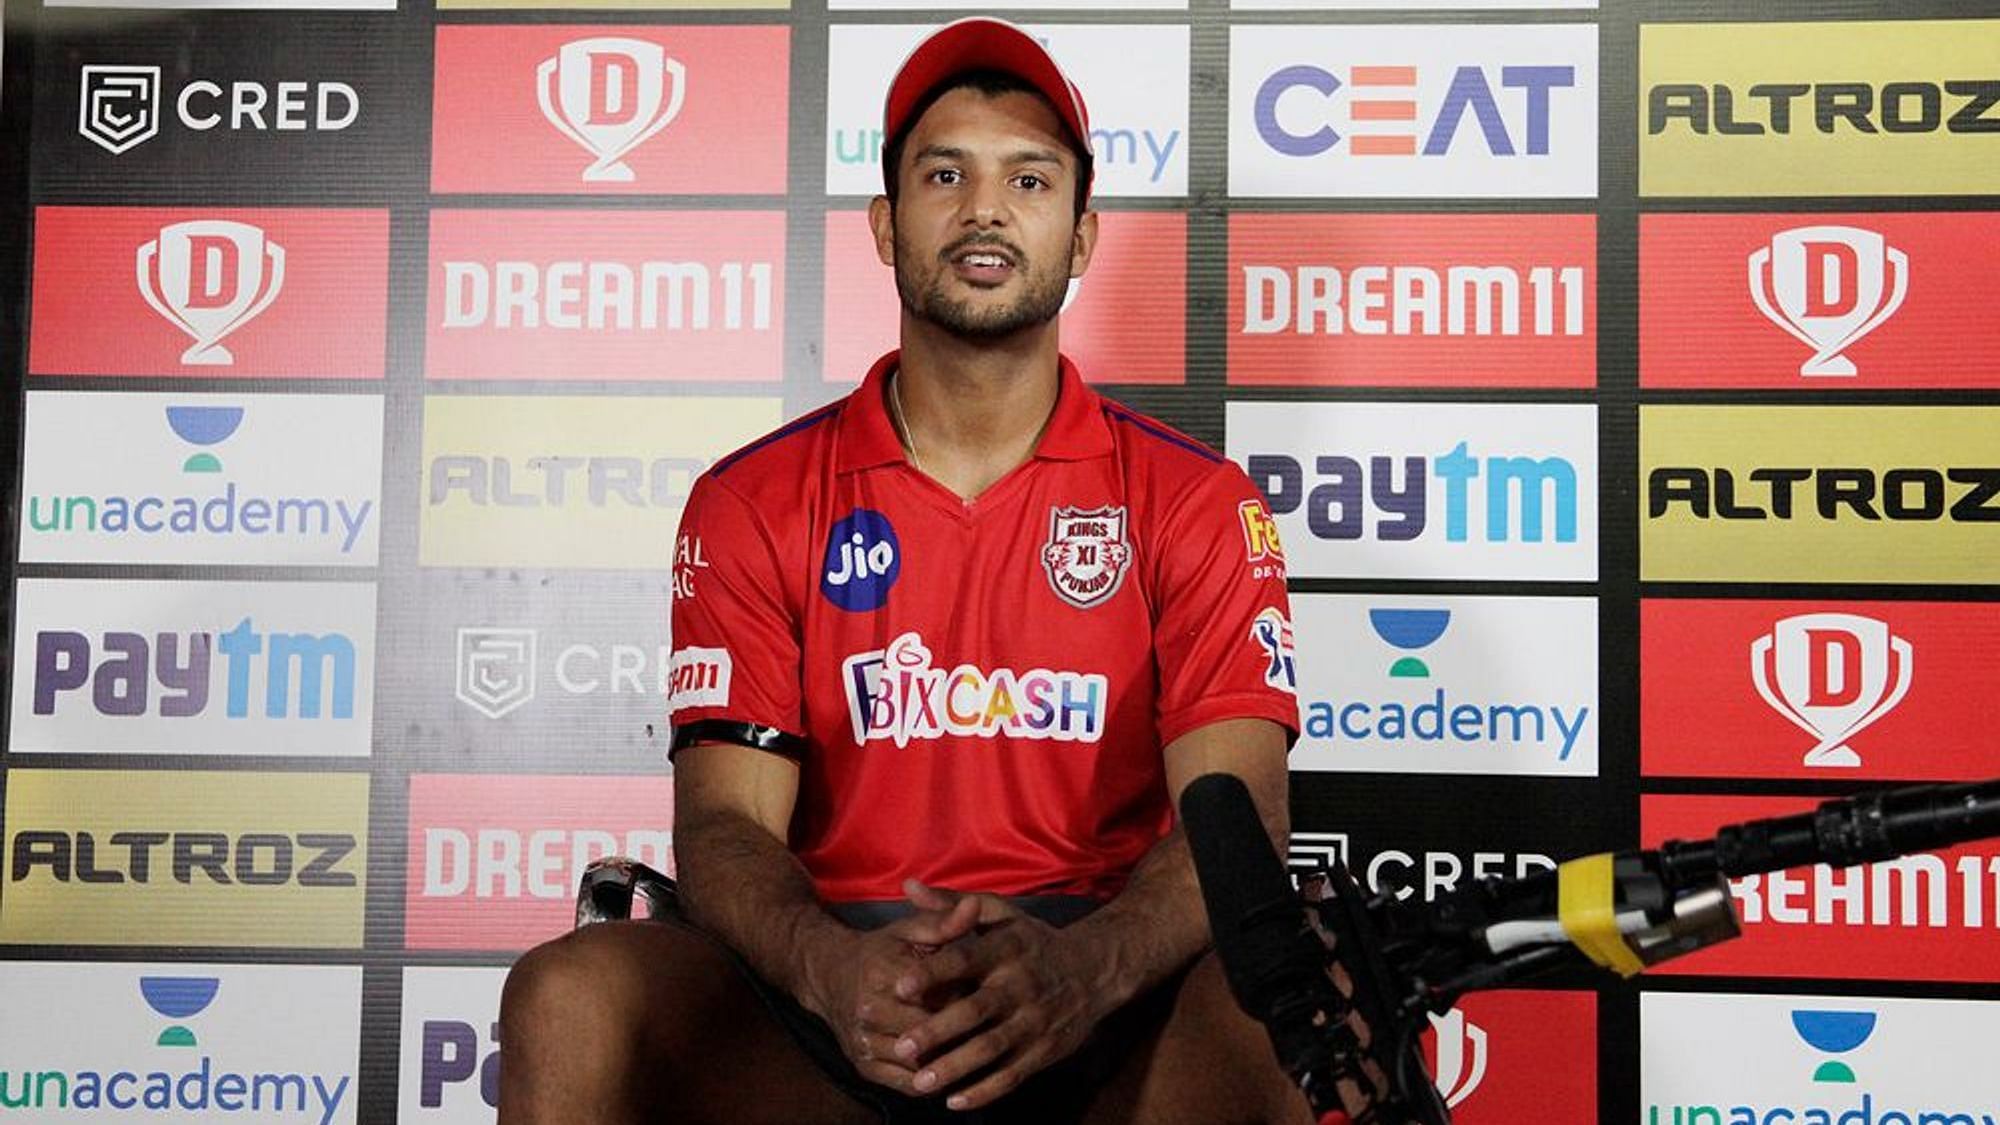 Kings XI Punjab’s opener Mayank Agarwal hit a century in a losing cause against Rajasthan Royals on Sunday